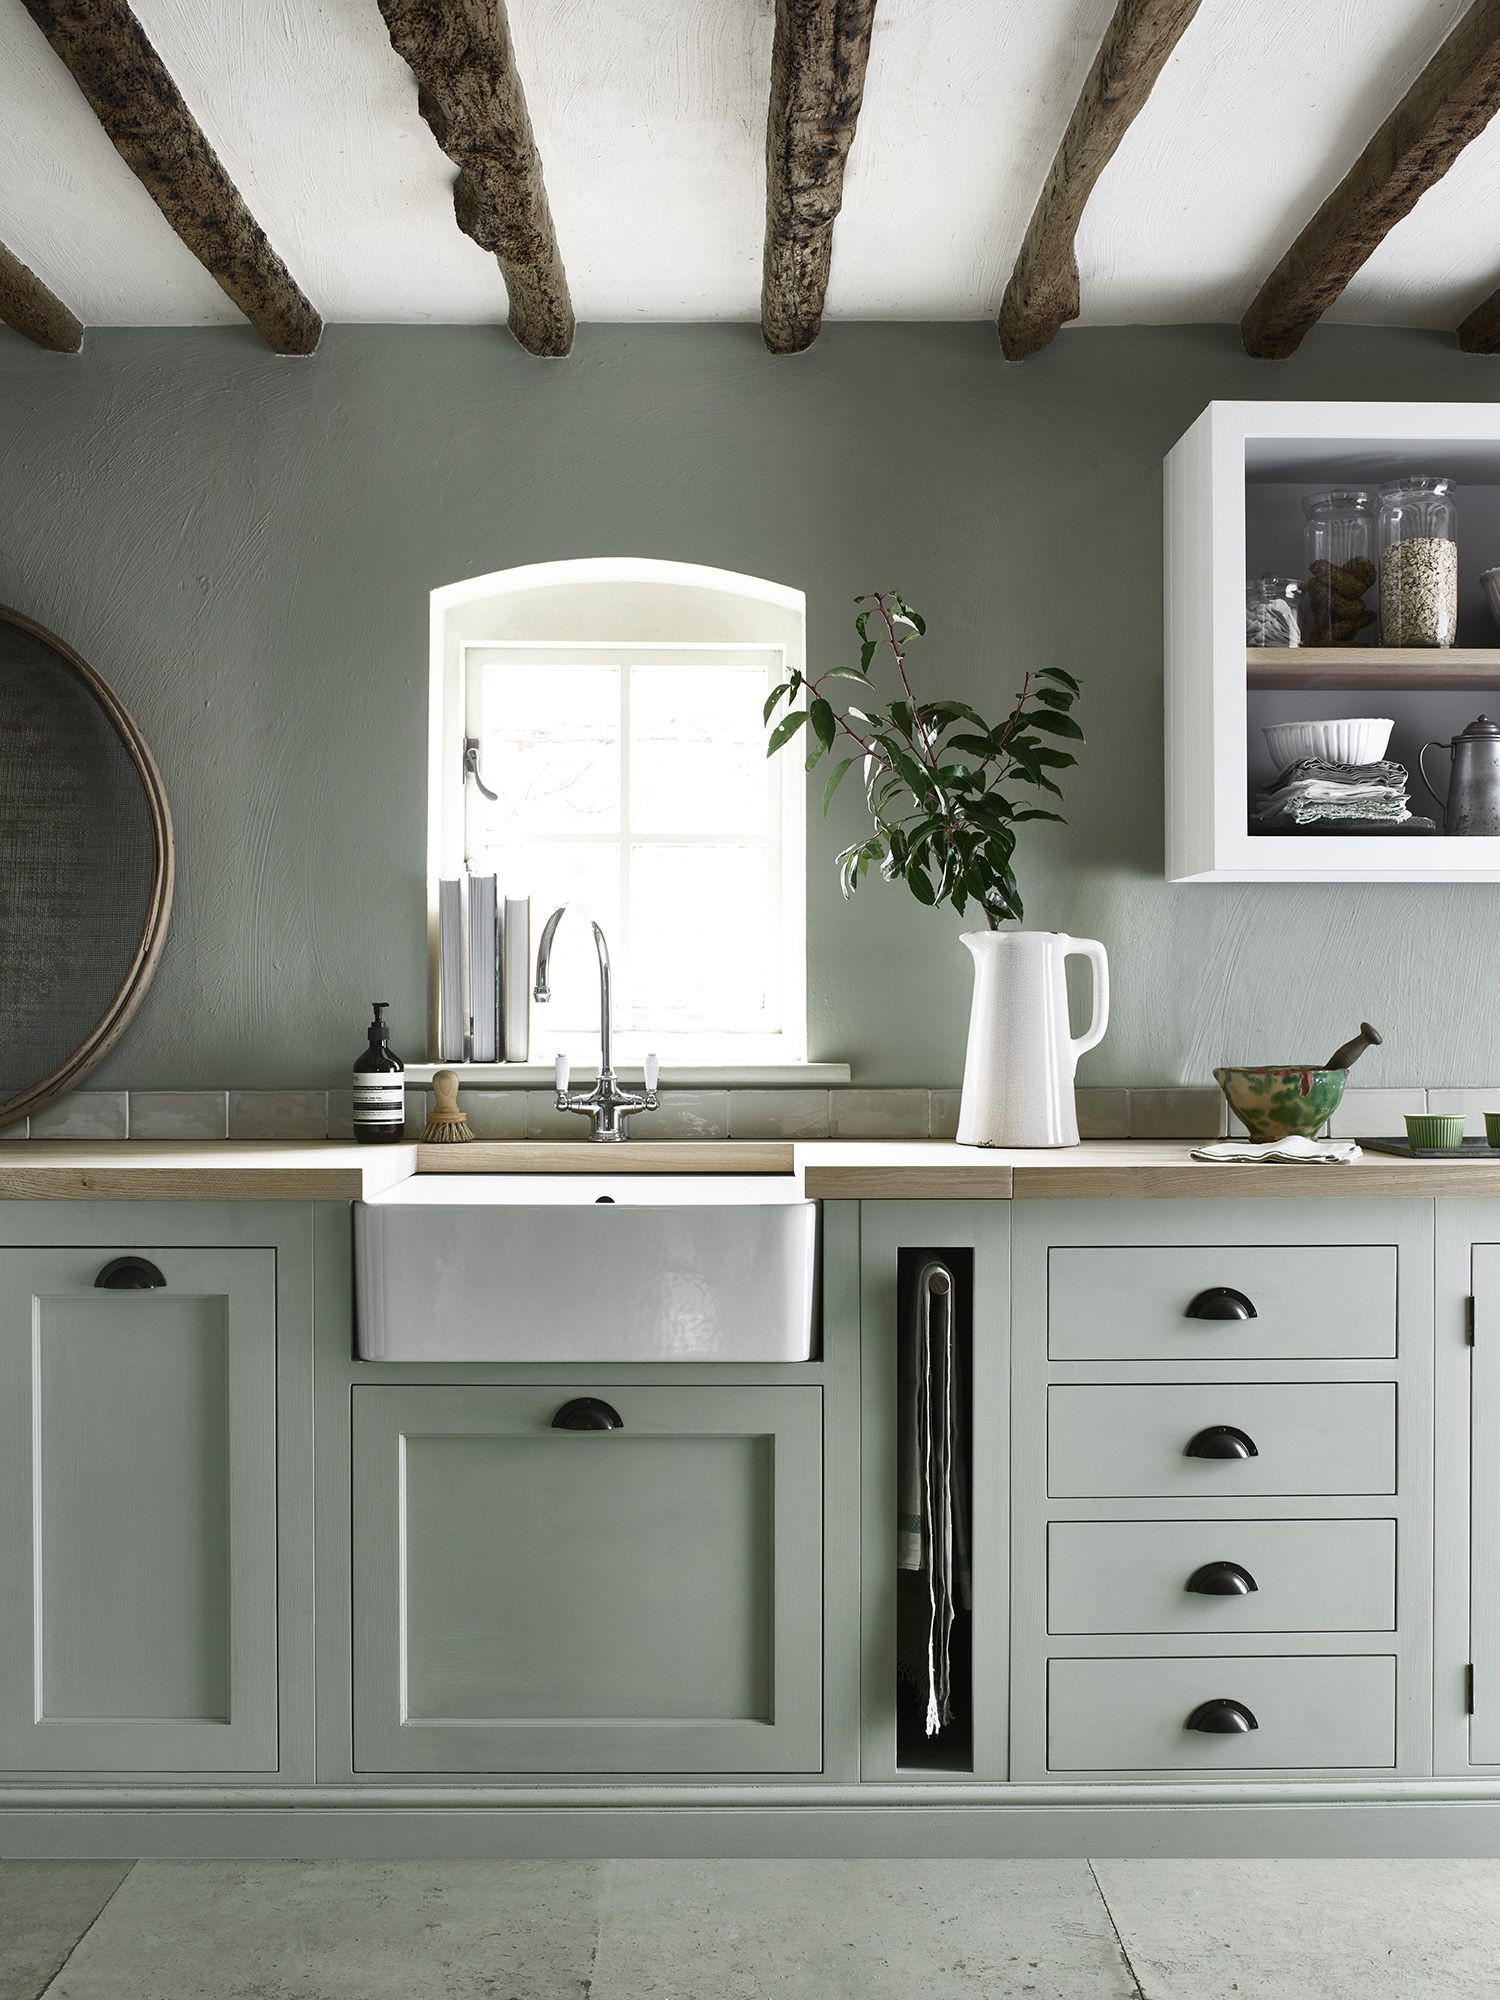 Sage Green Kitchen Walls
 Henley kitchen hand painted in Sage Great idea for pull